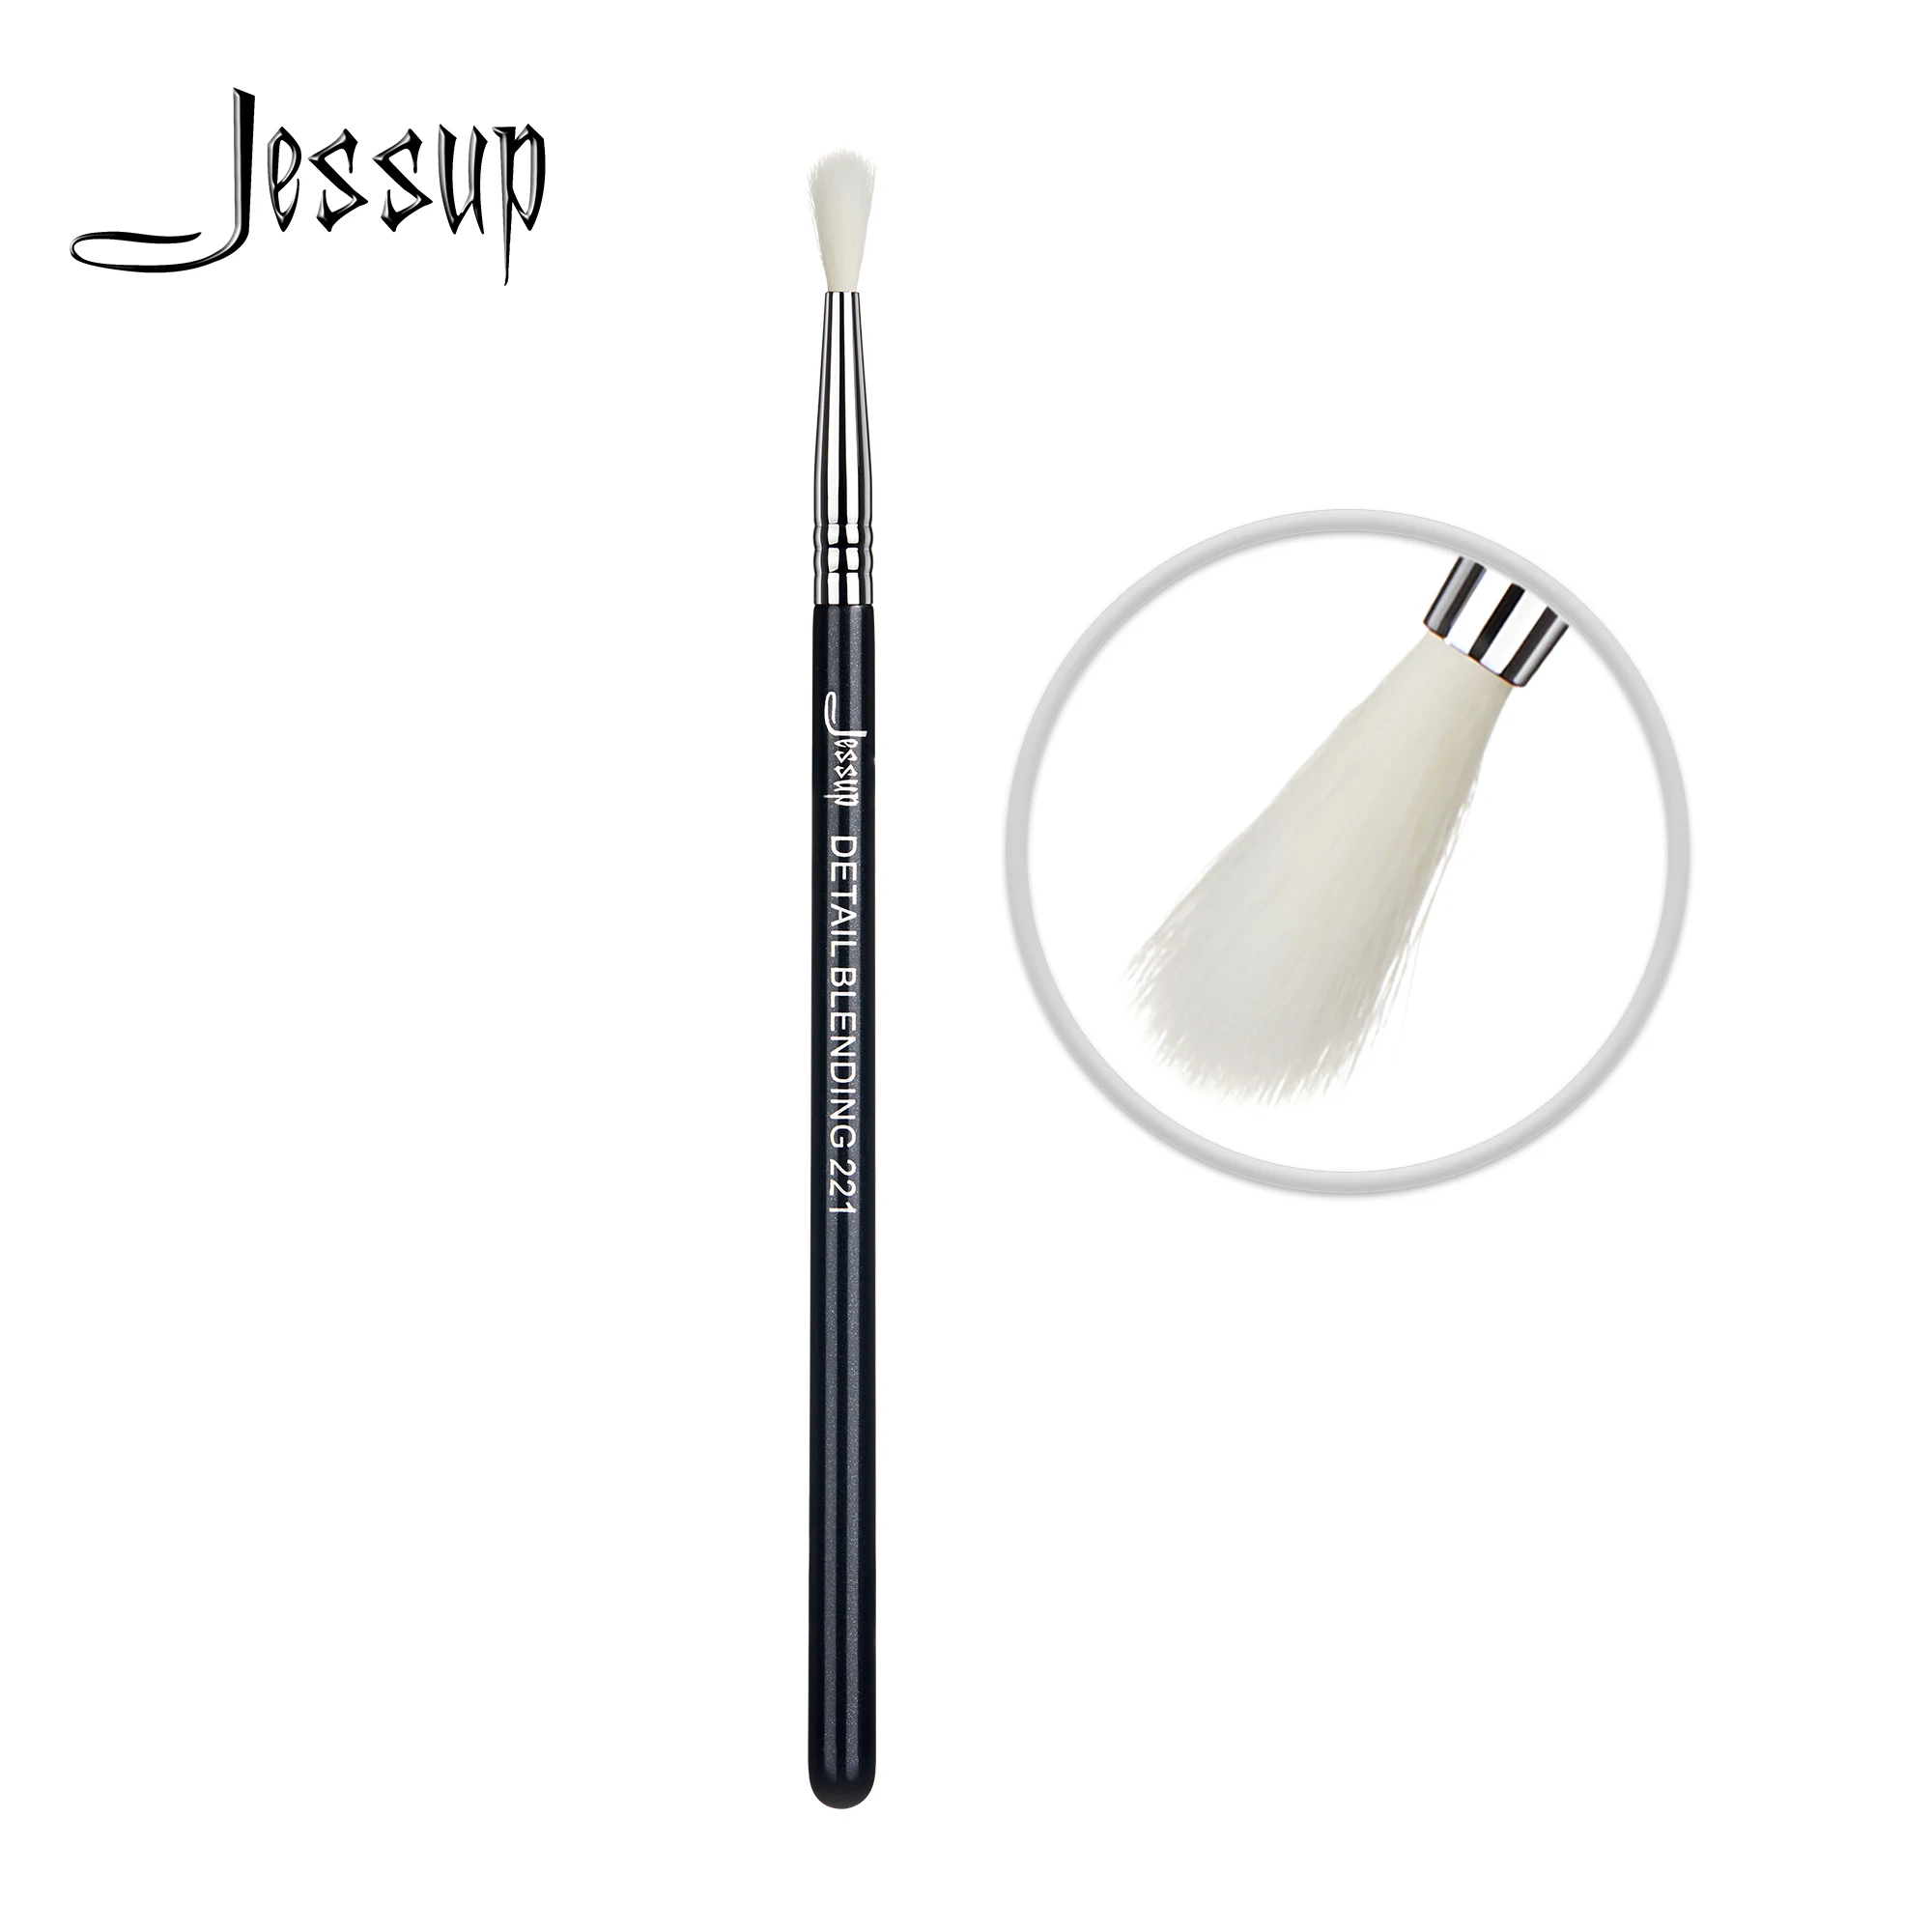 Good Value Eyeshadow-Brushes Cosmetics-Tools Makeup Blending Jessup Synthetic-Hair Powder for 1pcs r0QK39OXqDJ